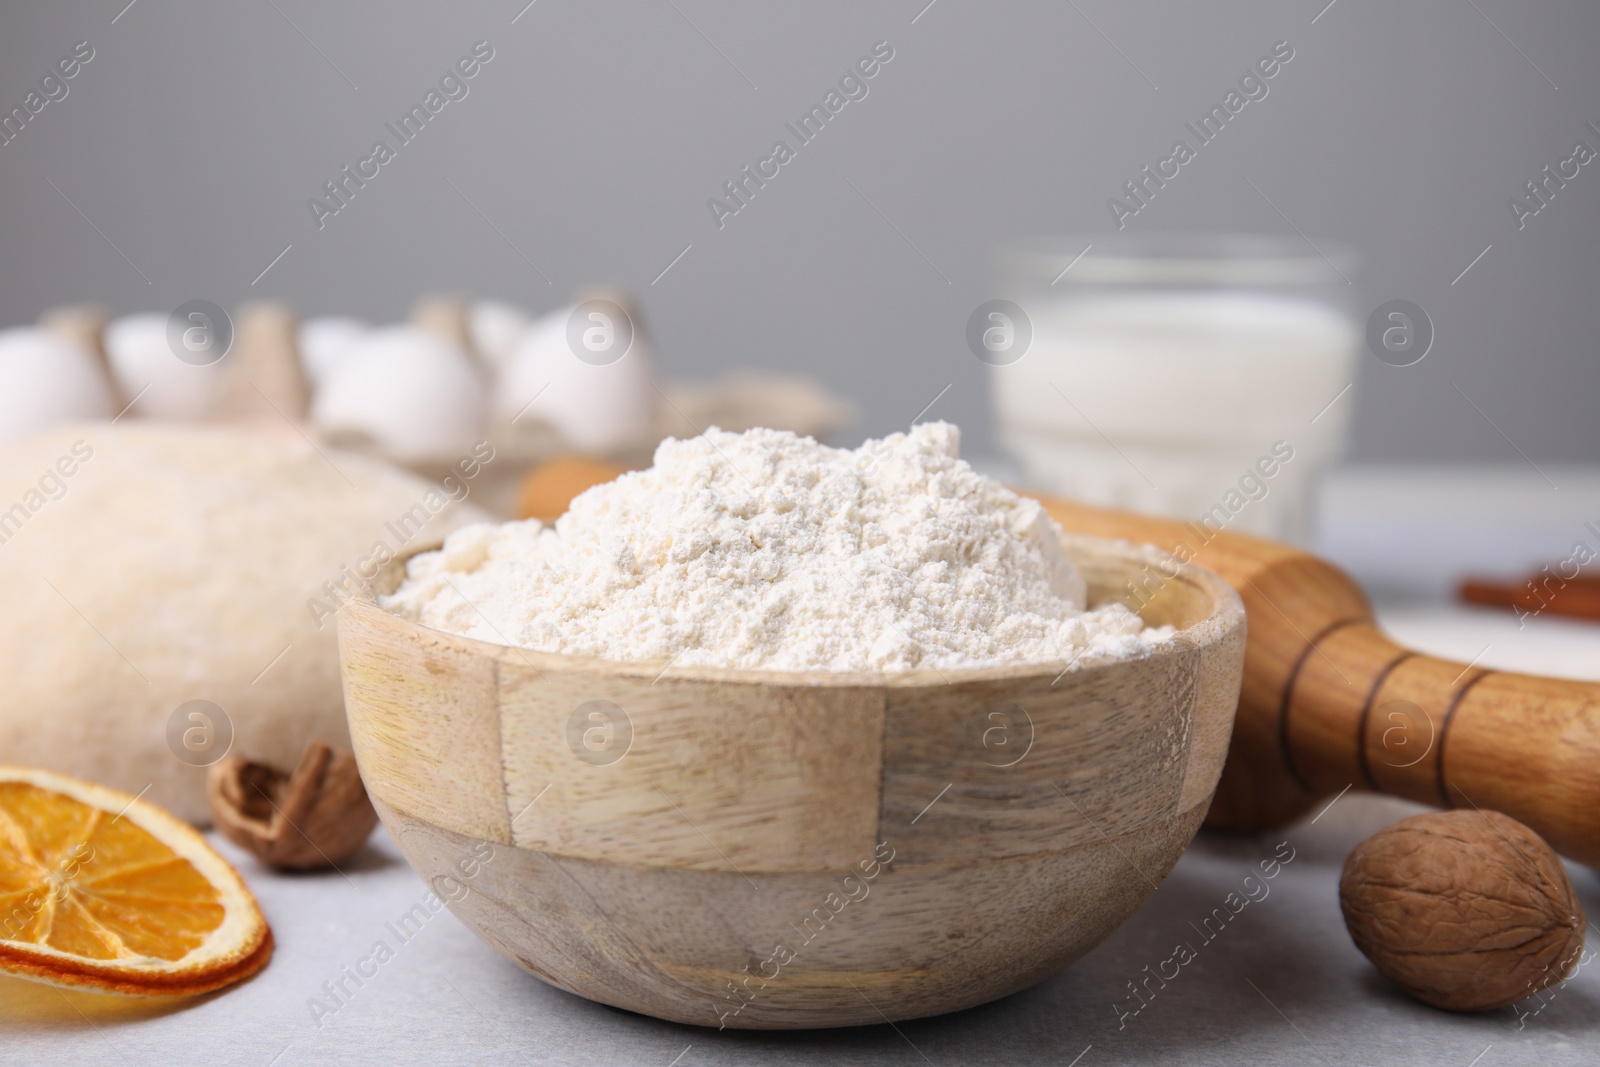 Photo of Bowl of flour and other ingredients on white table